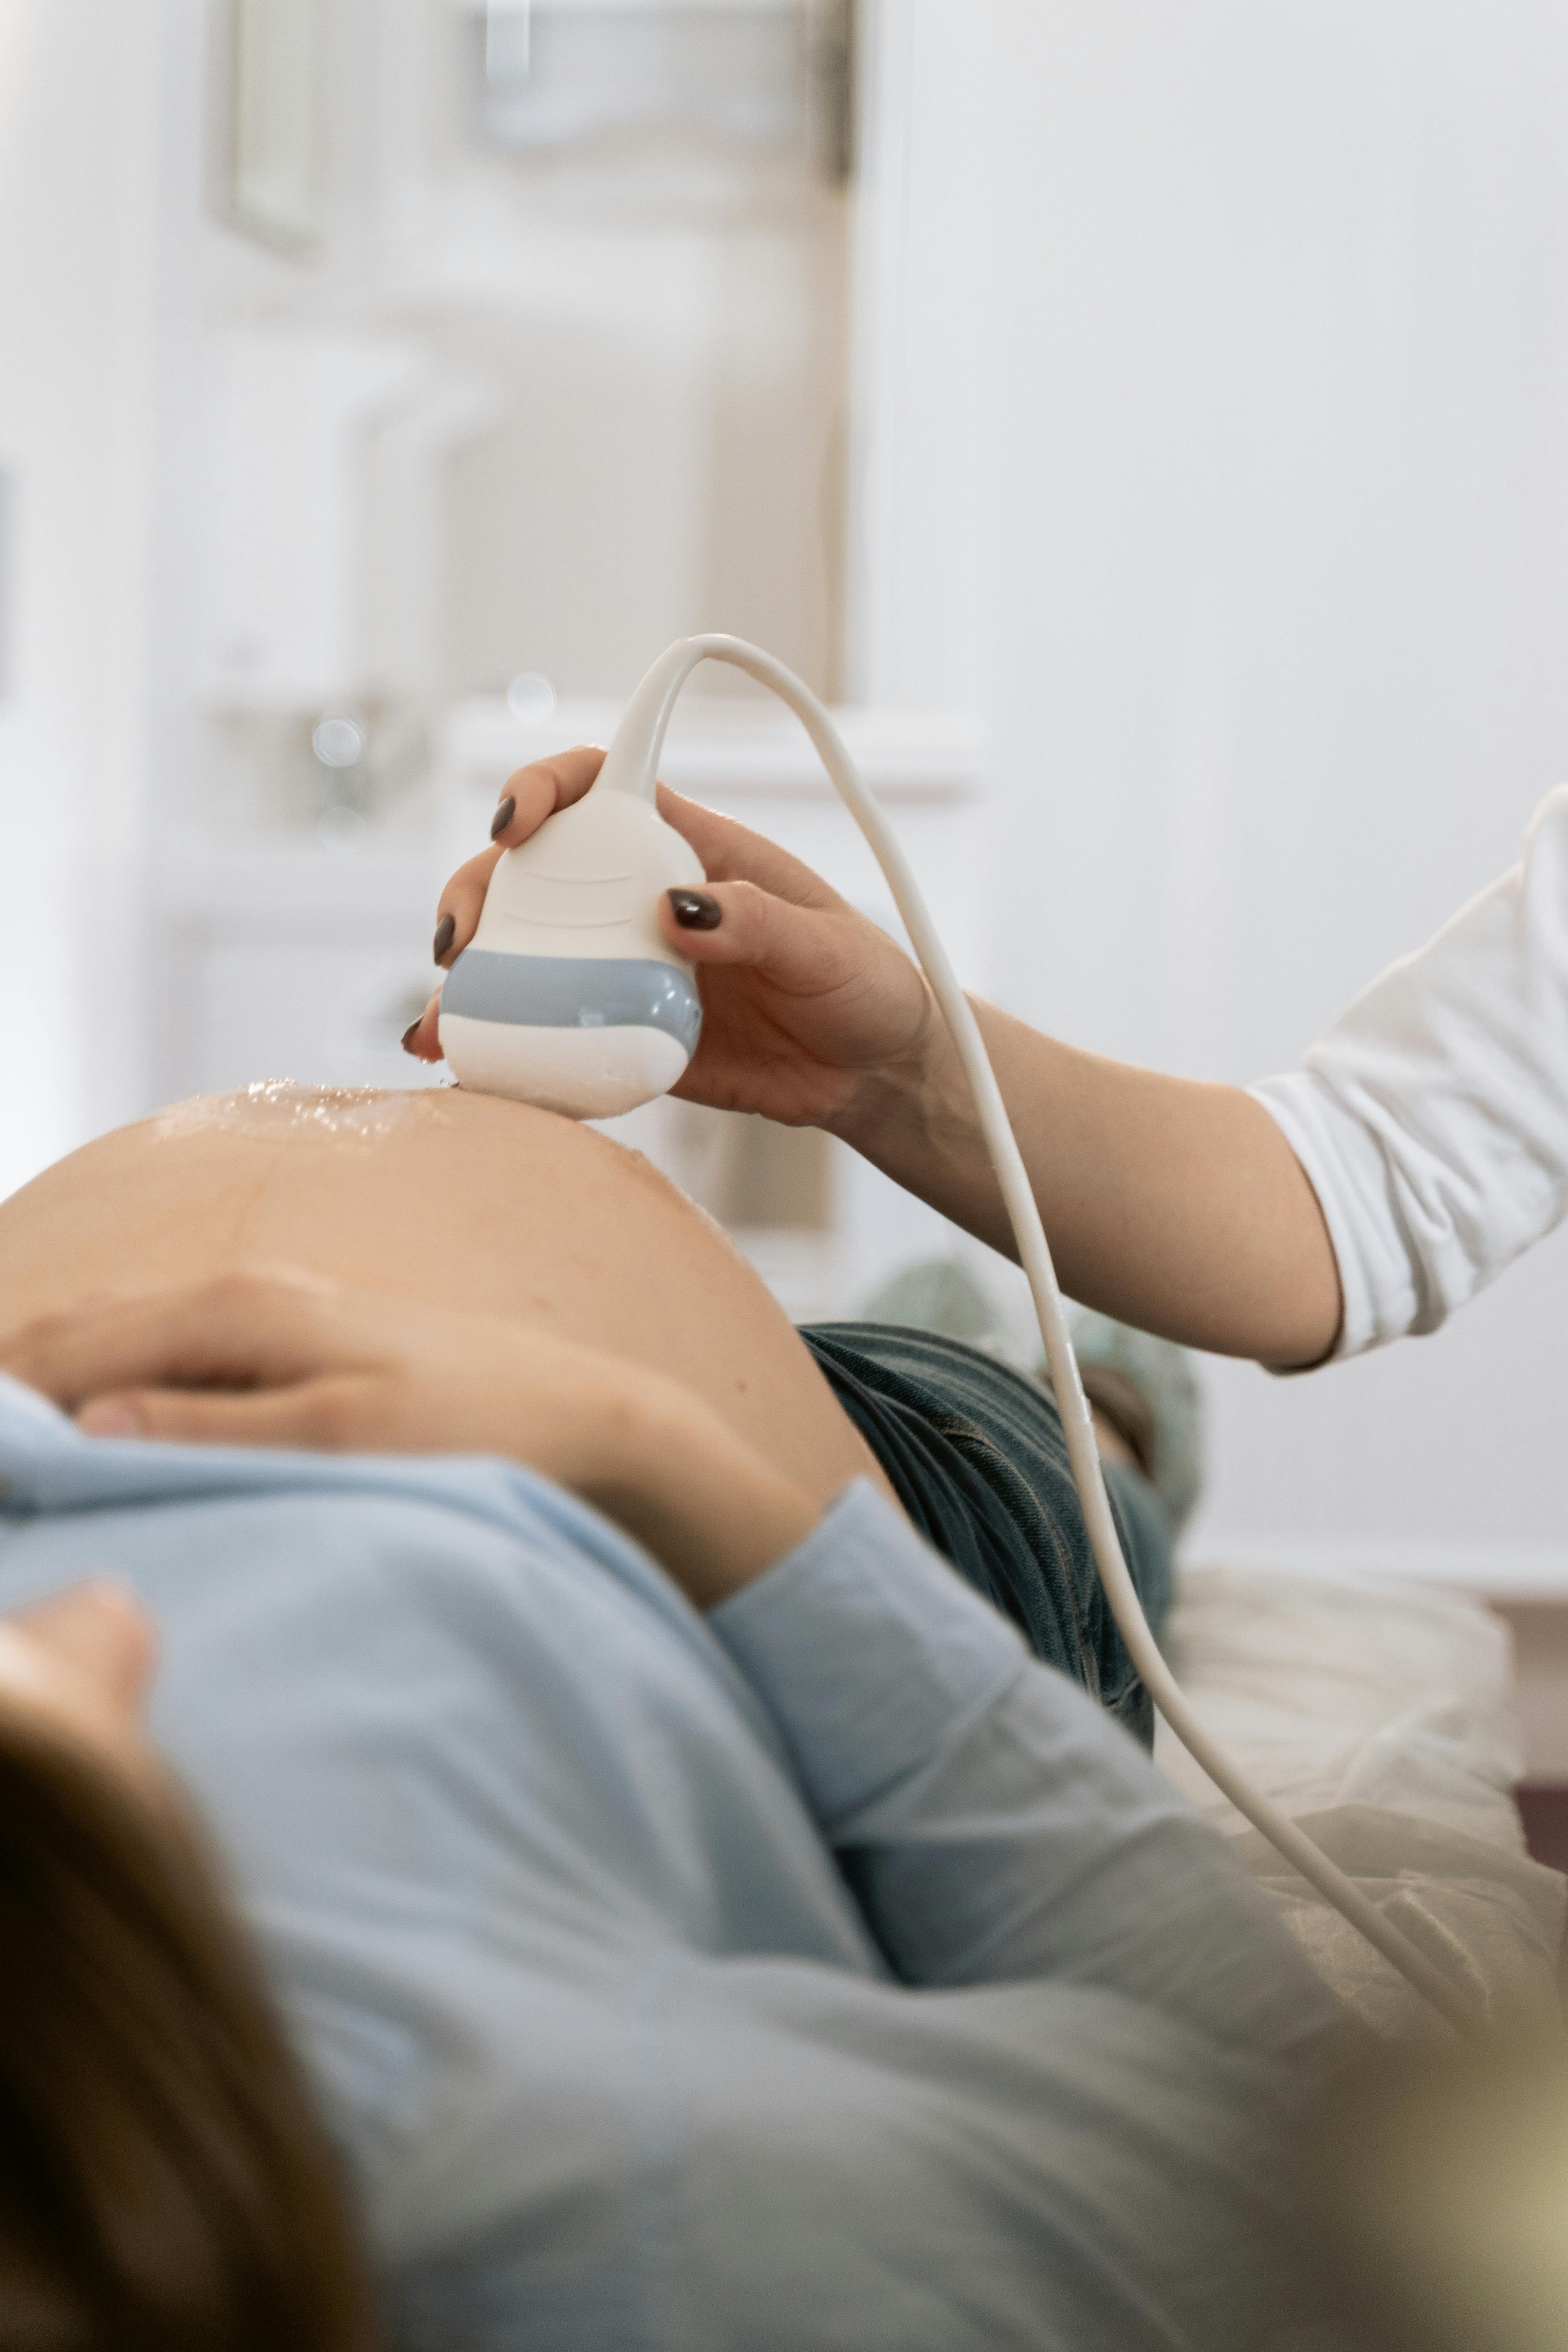 A pregnant woman during an ultrasound | Source: MART PRODUCTION on Pexels